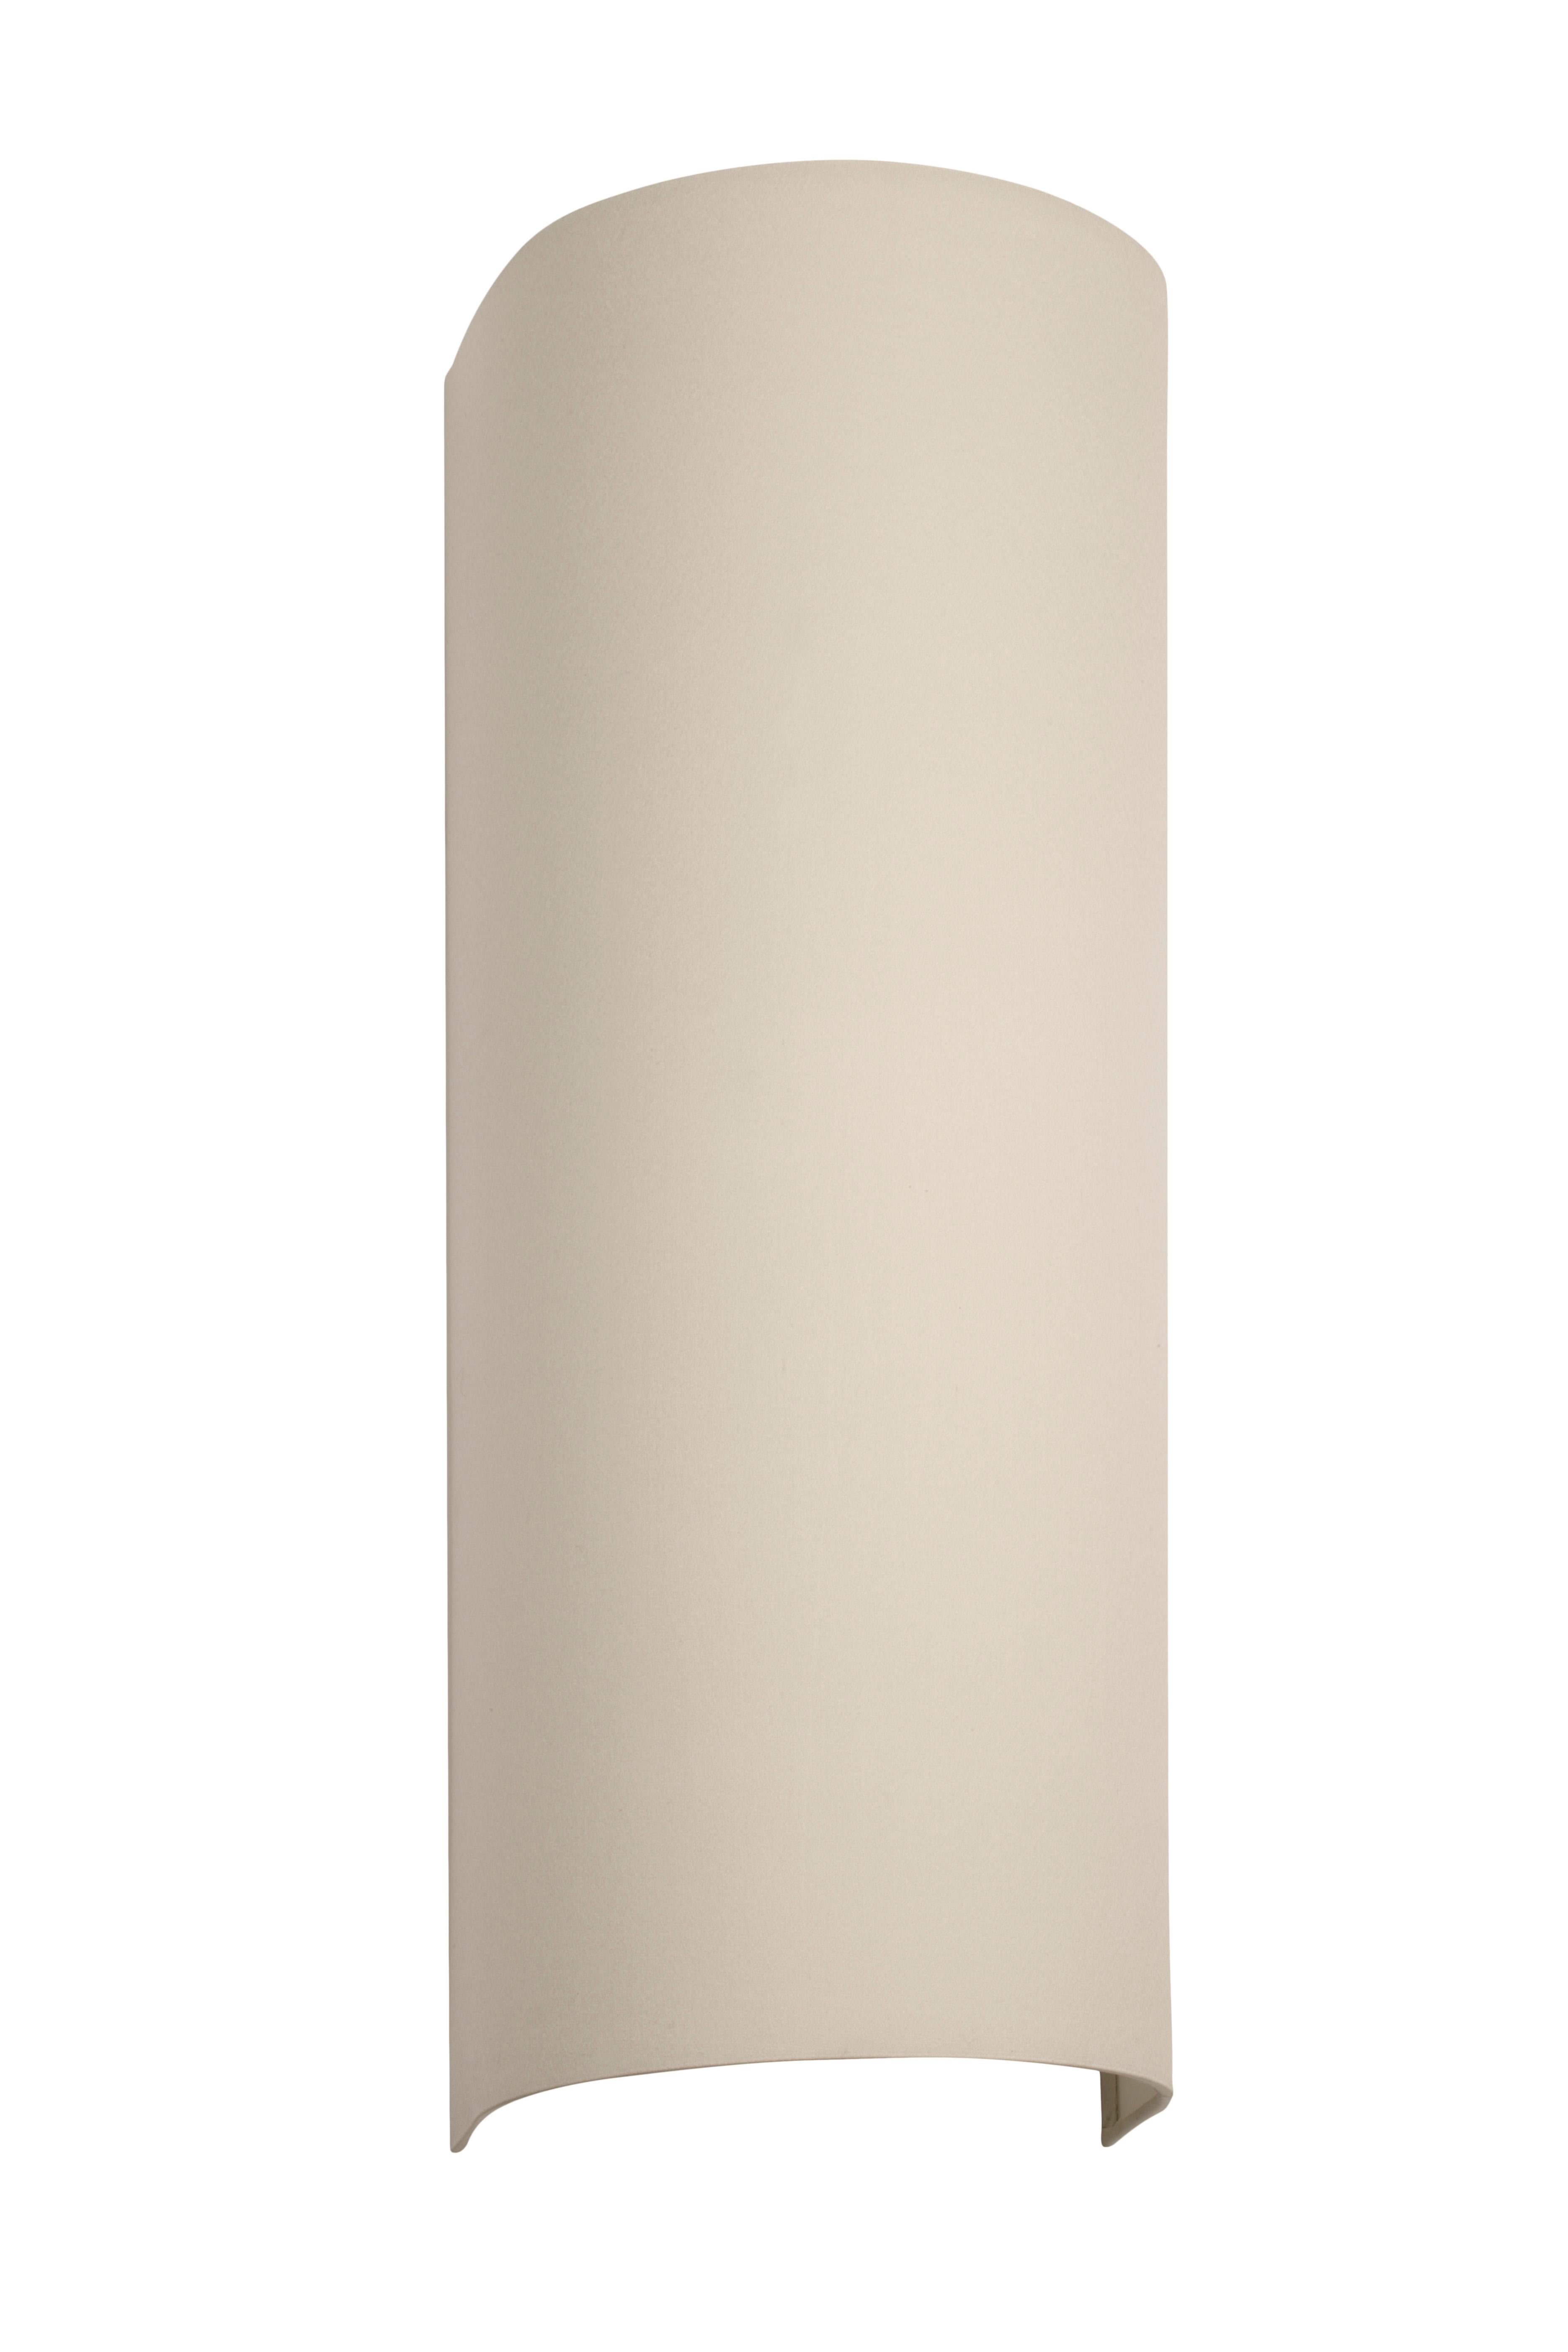 Wallwash wall-mount lamp by CTO Lighting
Materials: dove grey silk shade
Dimensions: H 46 x W 18 cm 

All our lamps can be wired according to each country. If sold to the USA it will be wired for the USA for instance.
Other sizes available
3 x